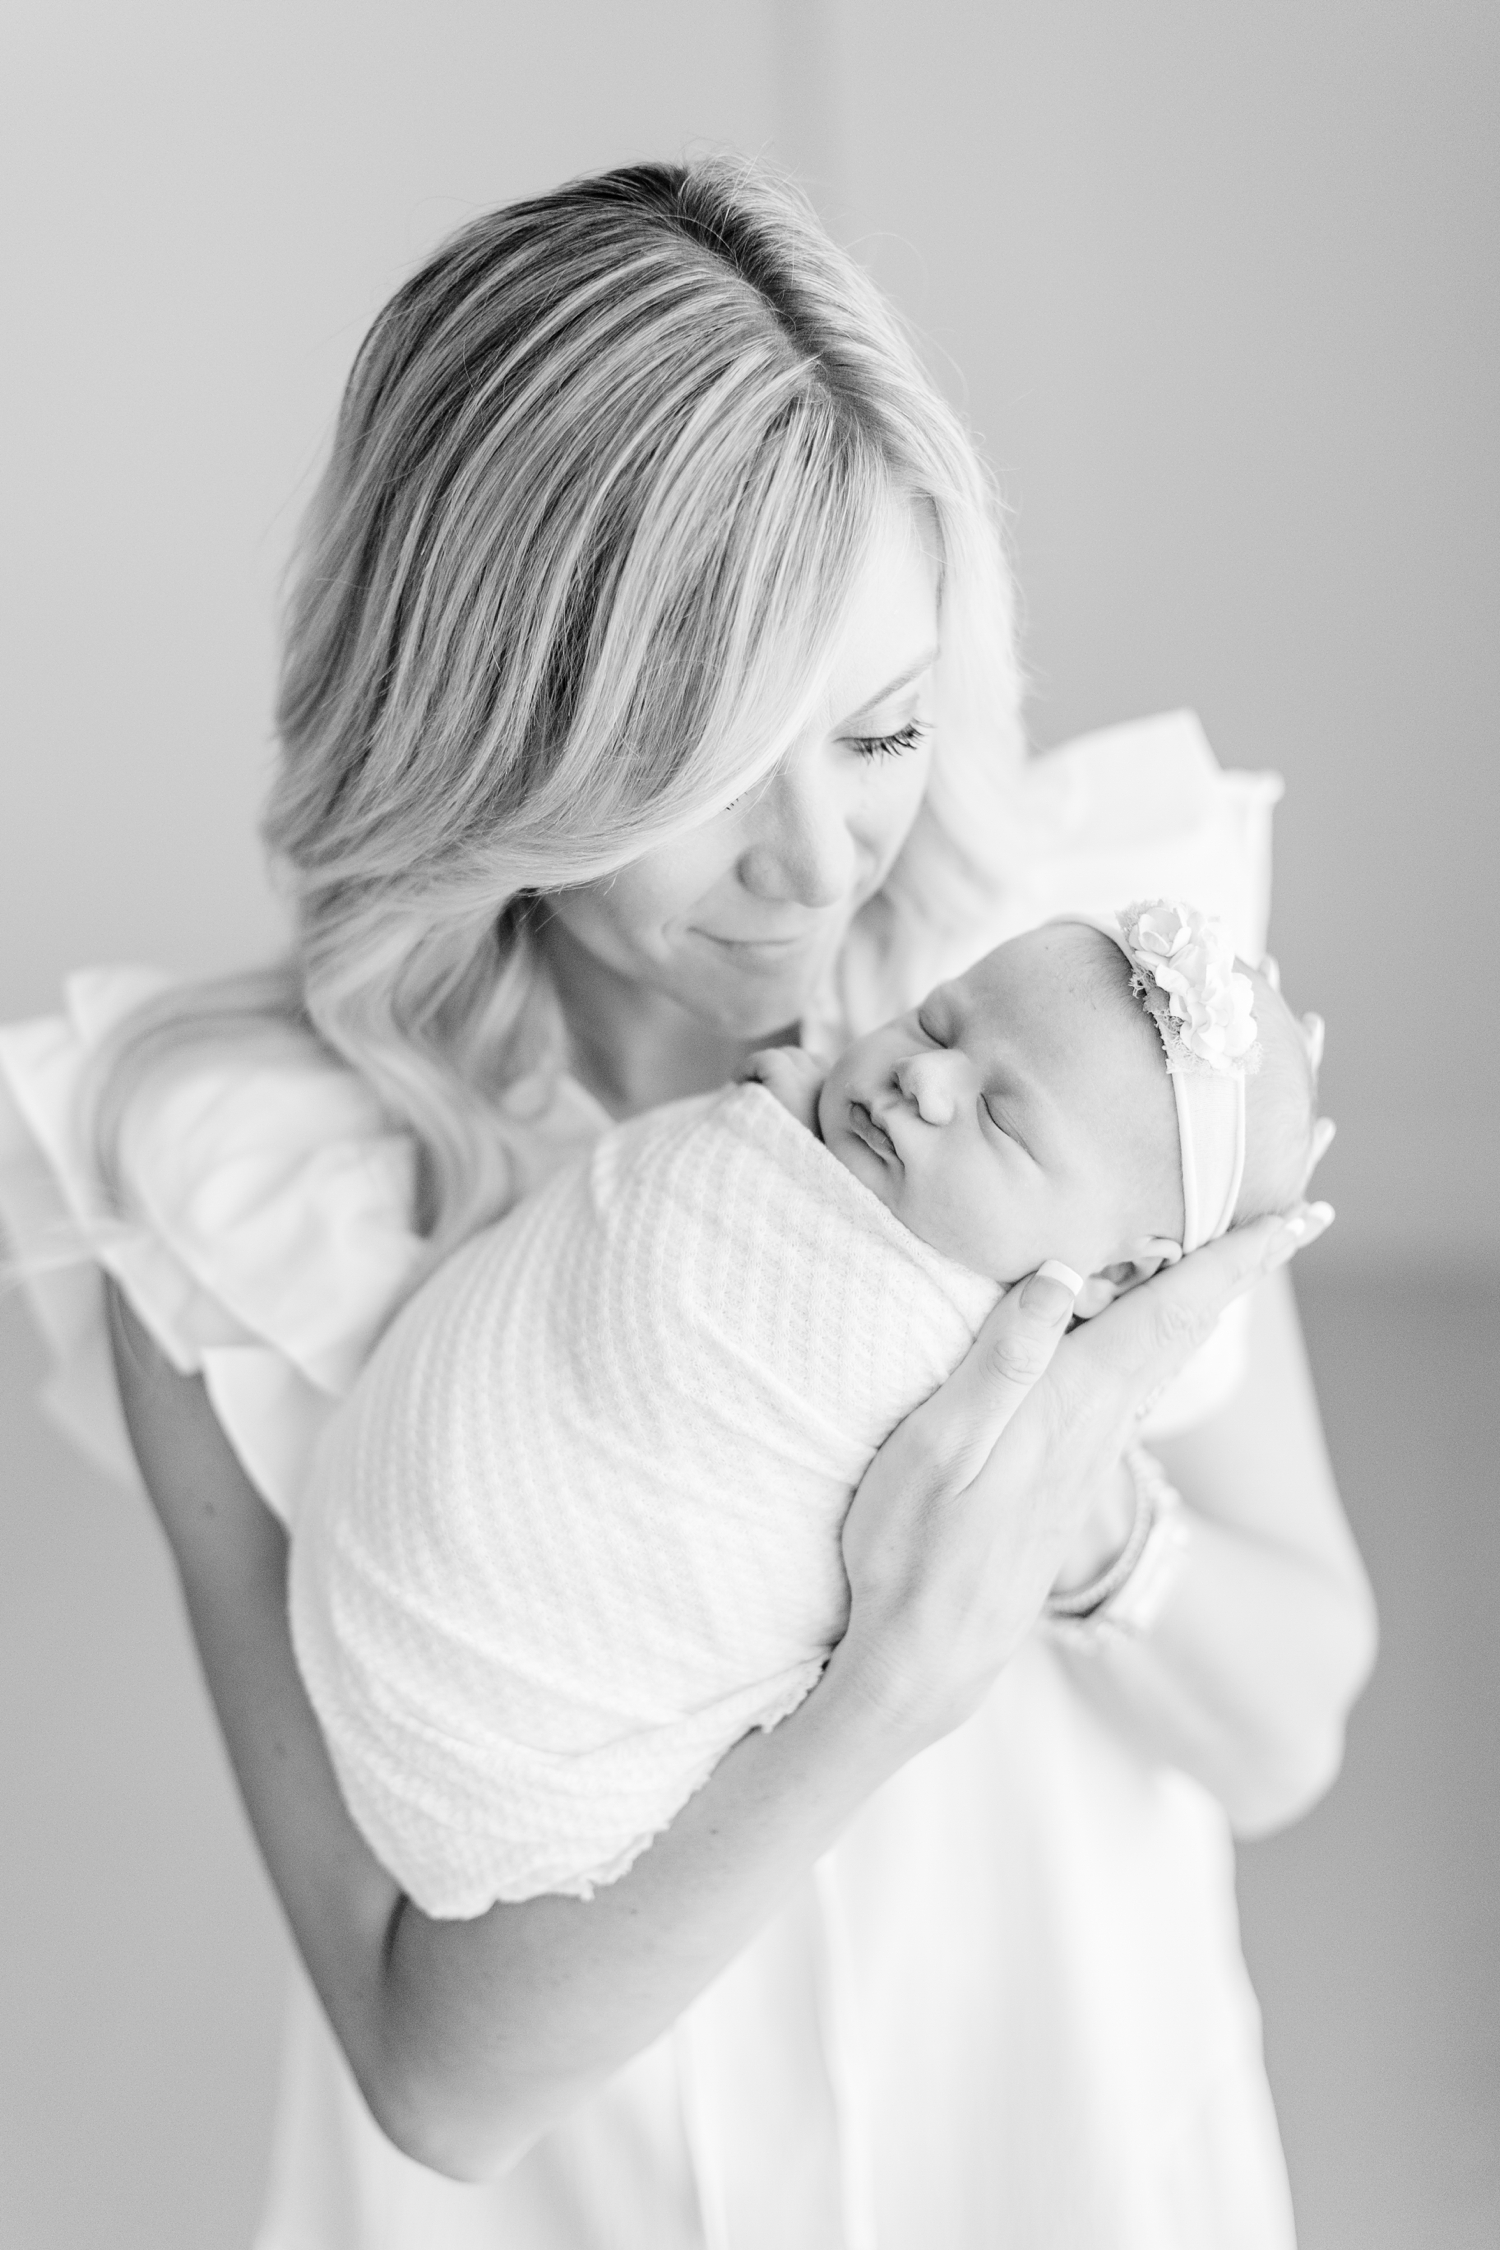 Ashley looks at her newborn baby girl as she snuggles her all wrapped up | CB Studio